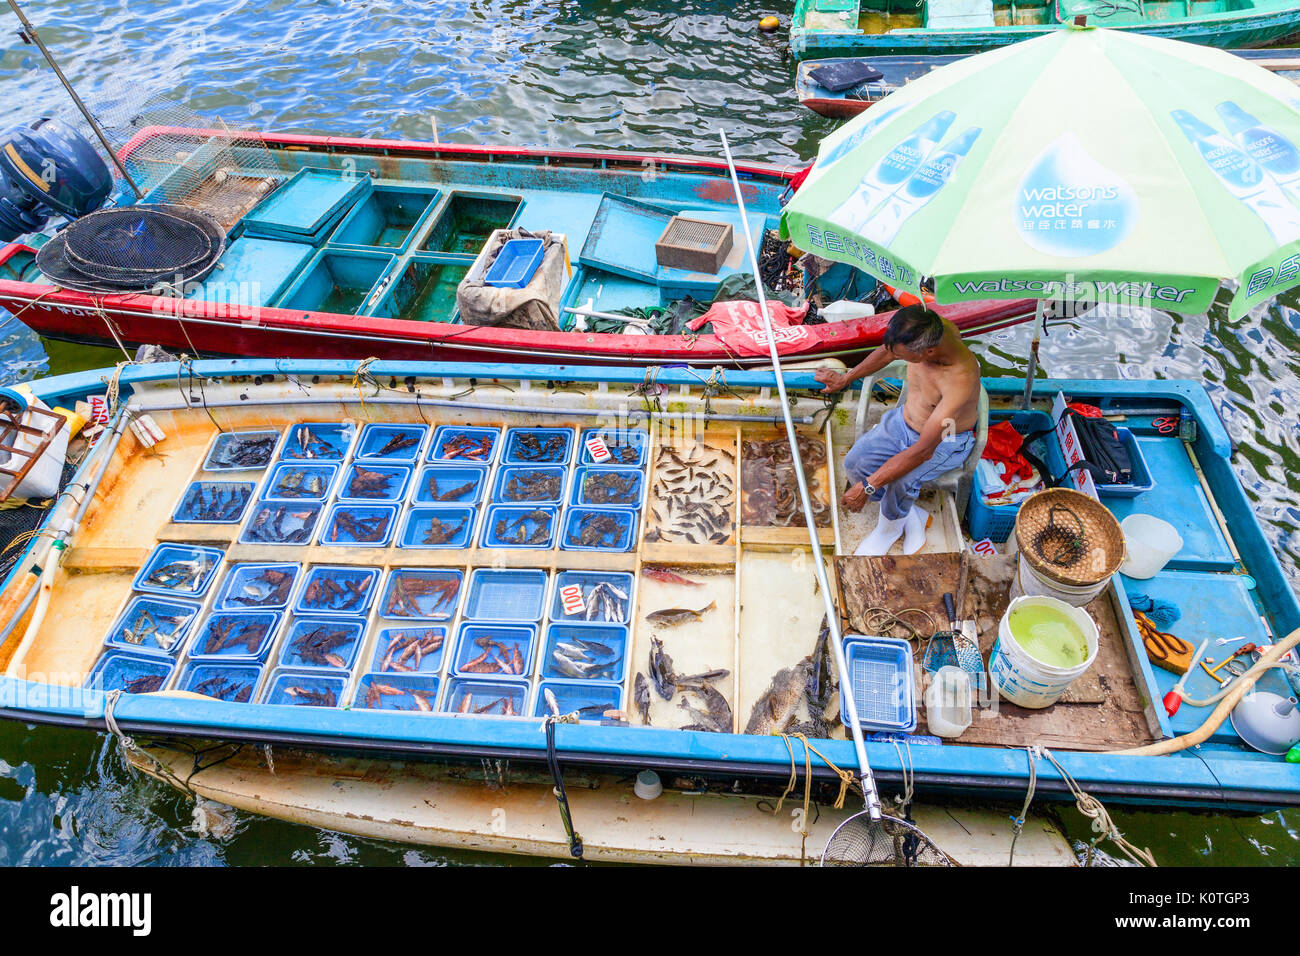 HONG KONG - JULY 13, 2017: A fisherman separates his live seafood catch into plastic containers on a boat at Sai Kung's floating seafood market. Every Stock Photo